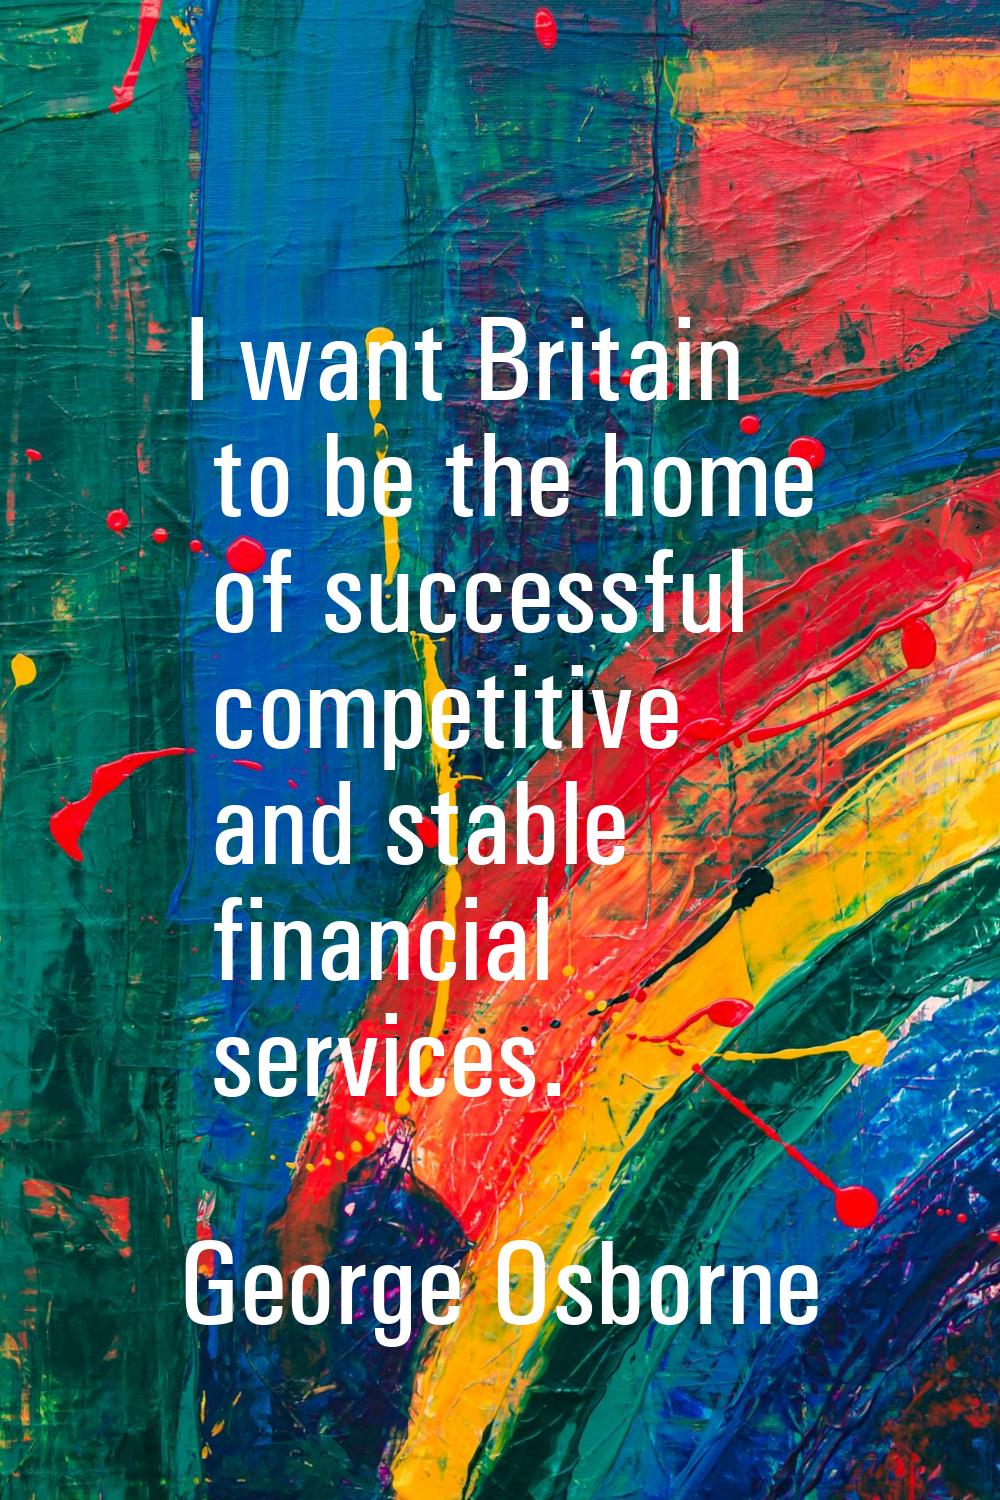 I want Britain to be the home of successful competitive and stable financial services.